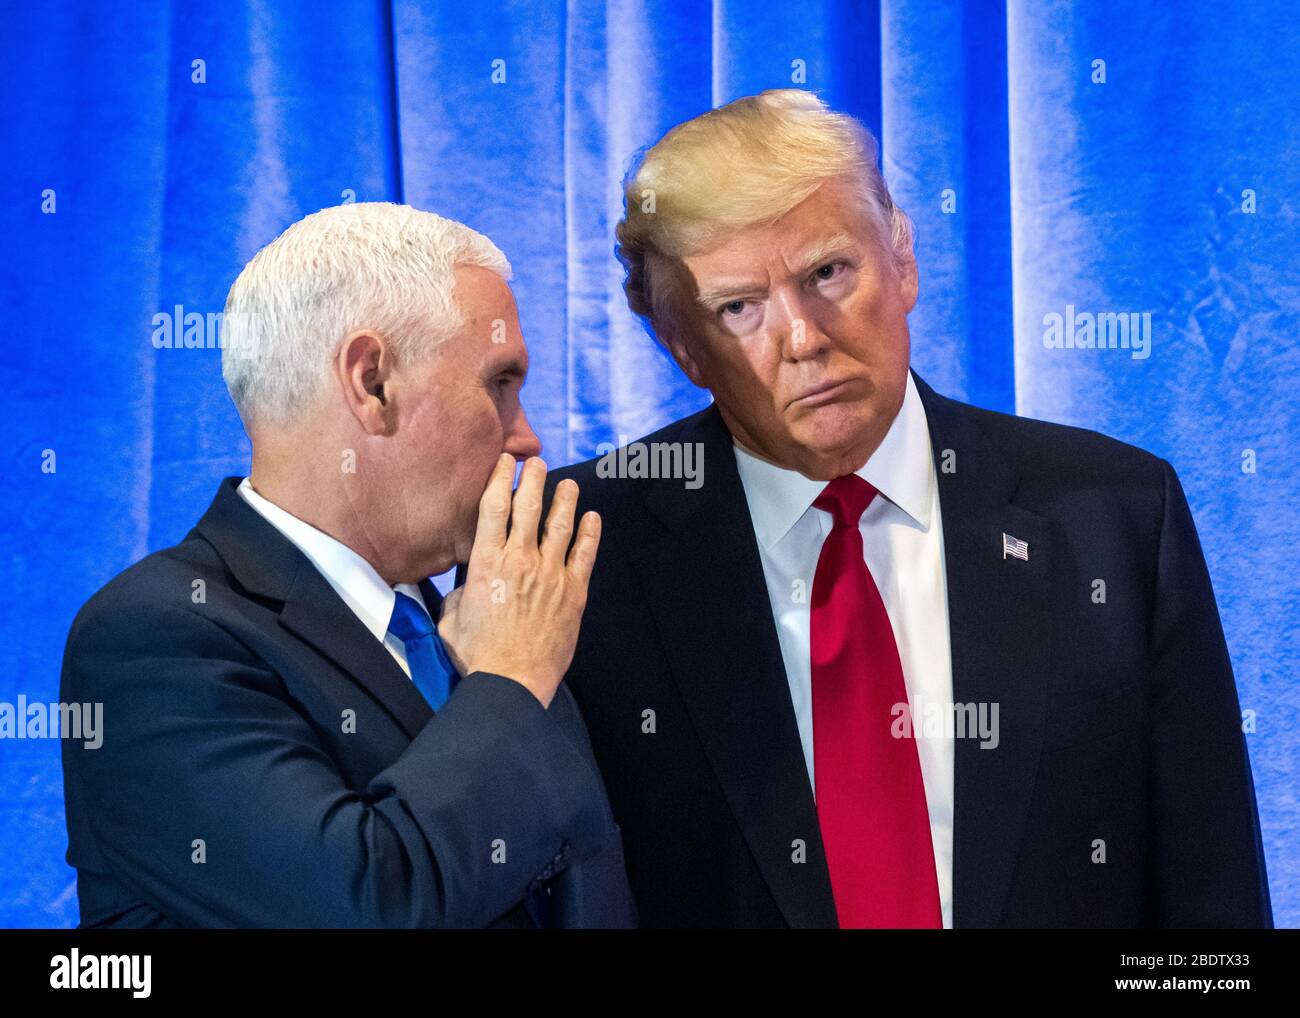 New York, USA, 11 Jan 2016 - US President-elect Donald Trump (R) listens to Vice-President-elect Mike Pence in New York on January 11, 2016,  at a new Stock Photo